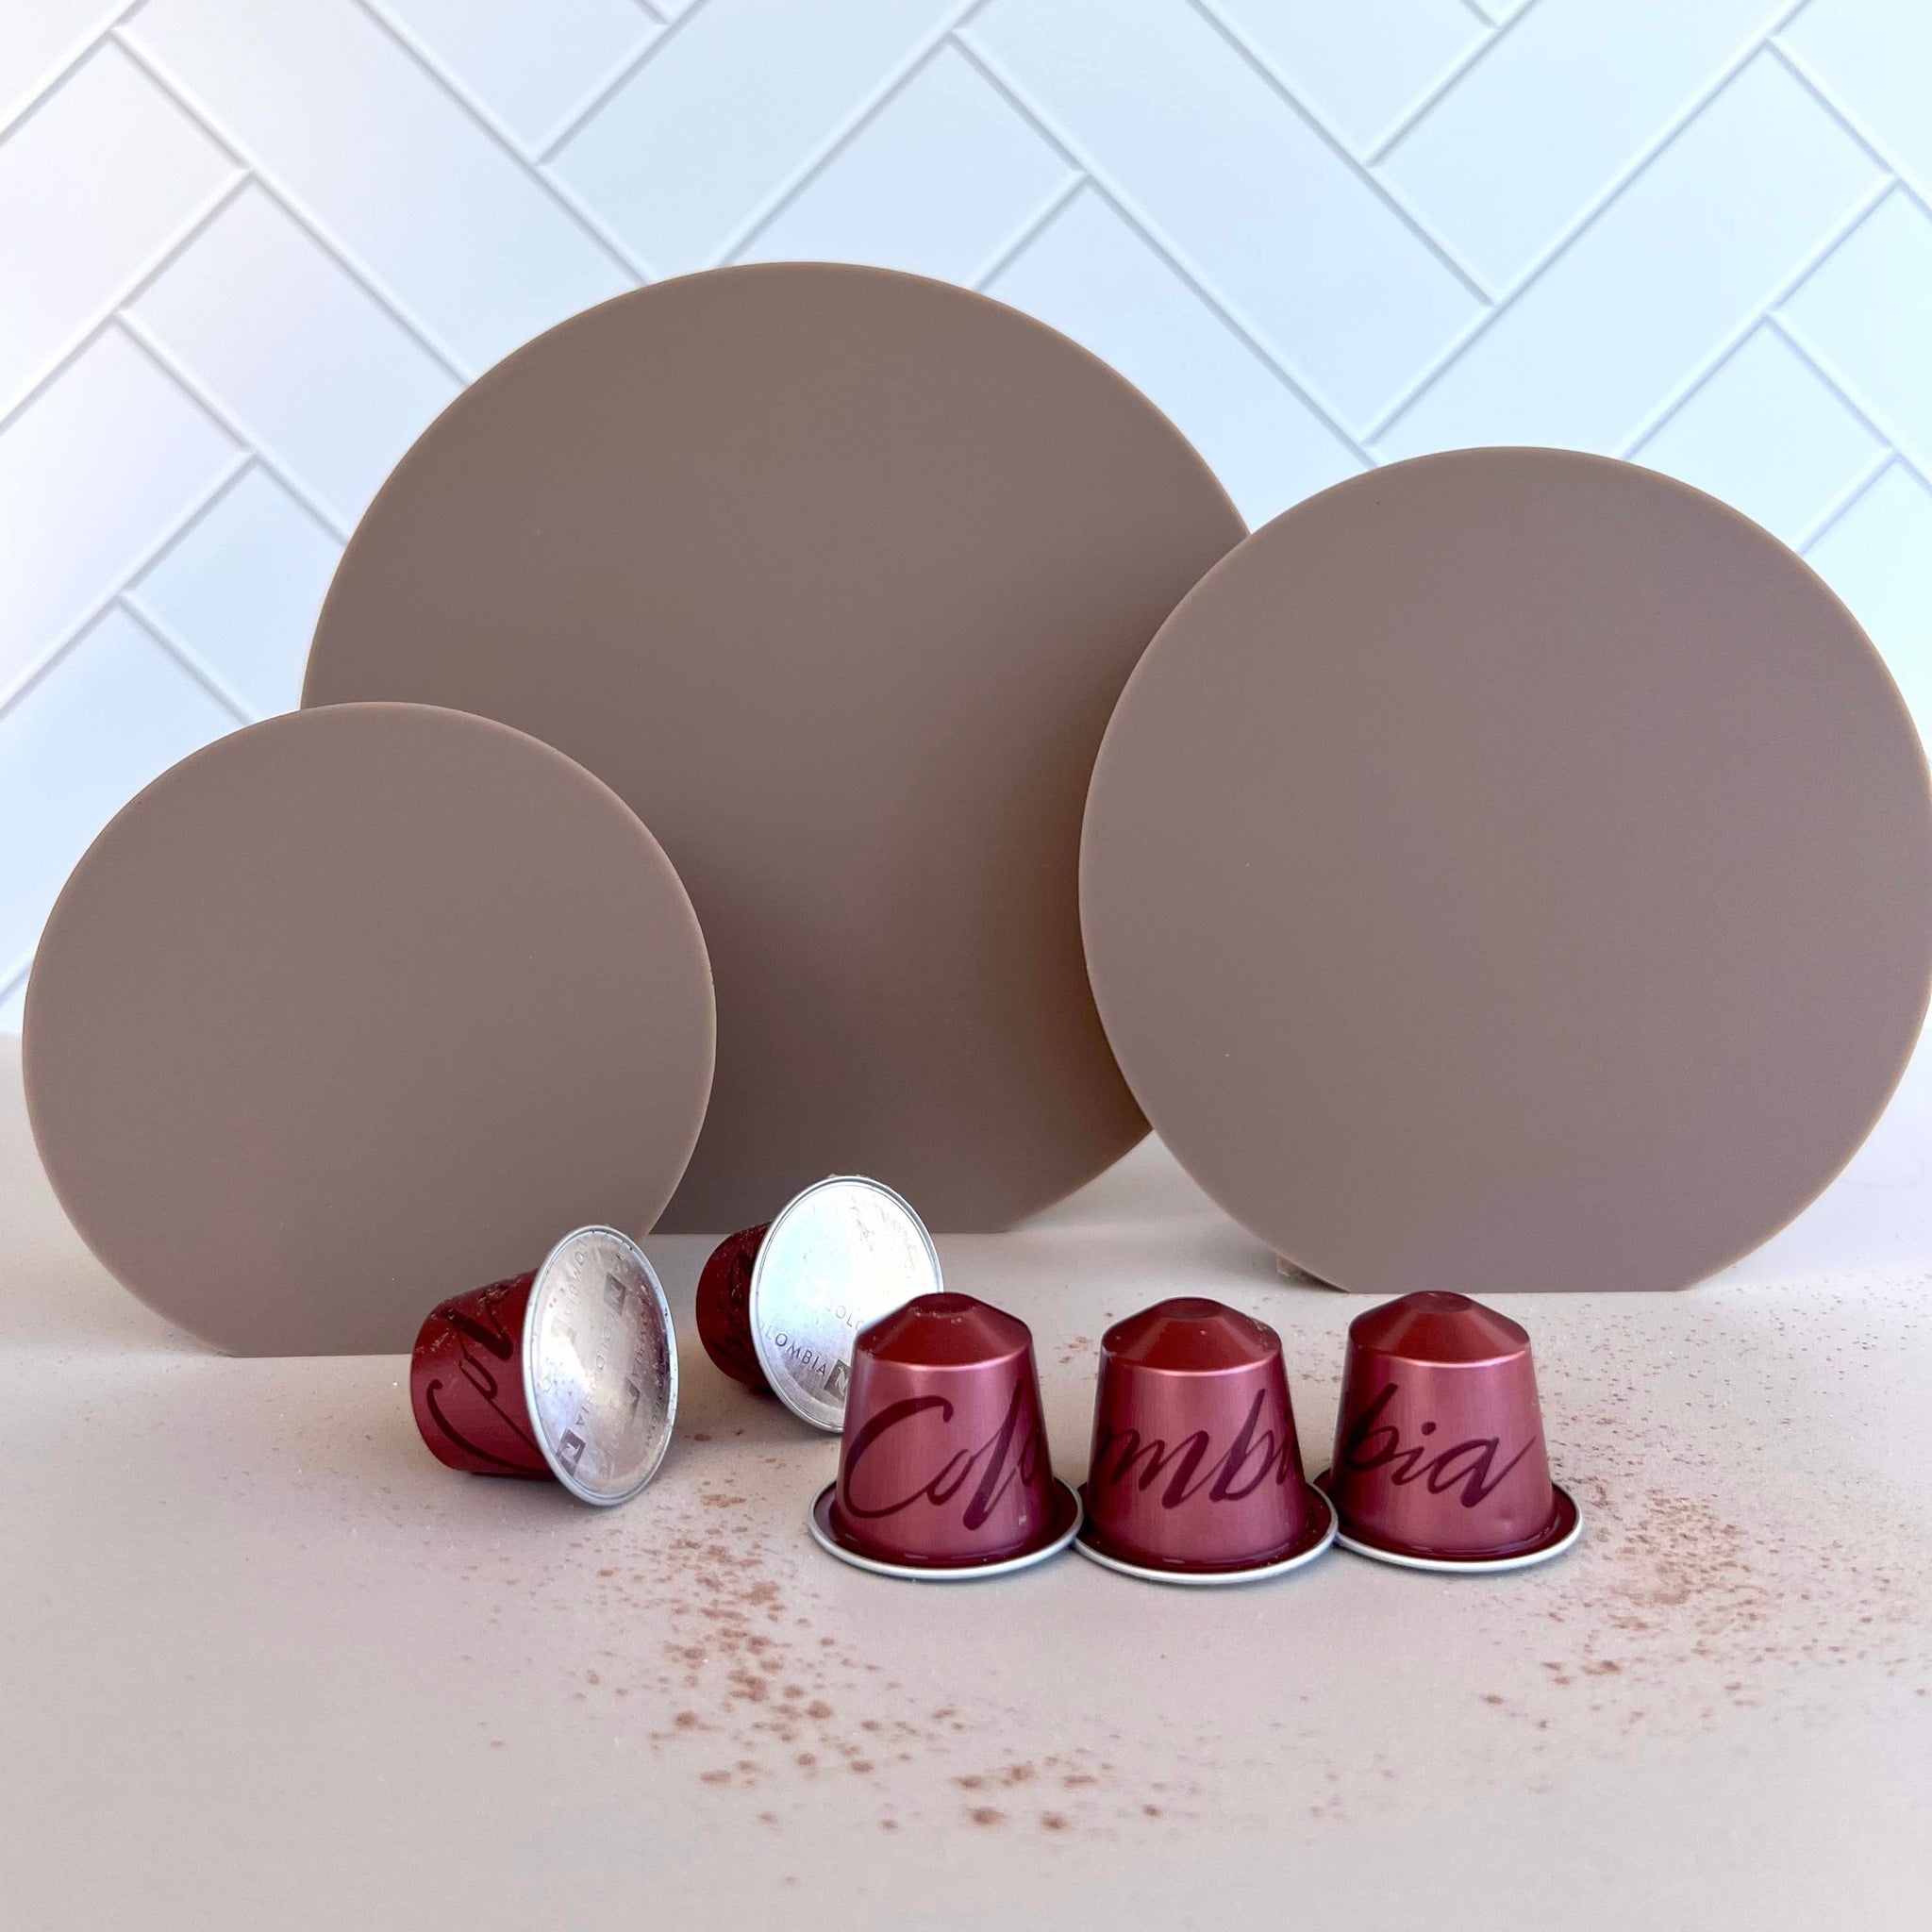 3 cappuccino circle props with white herringbone vinyl backdrop with coffee pods - backdrop collective australia 